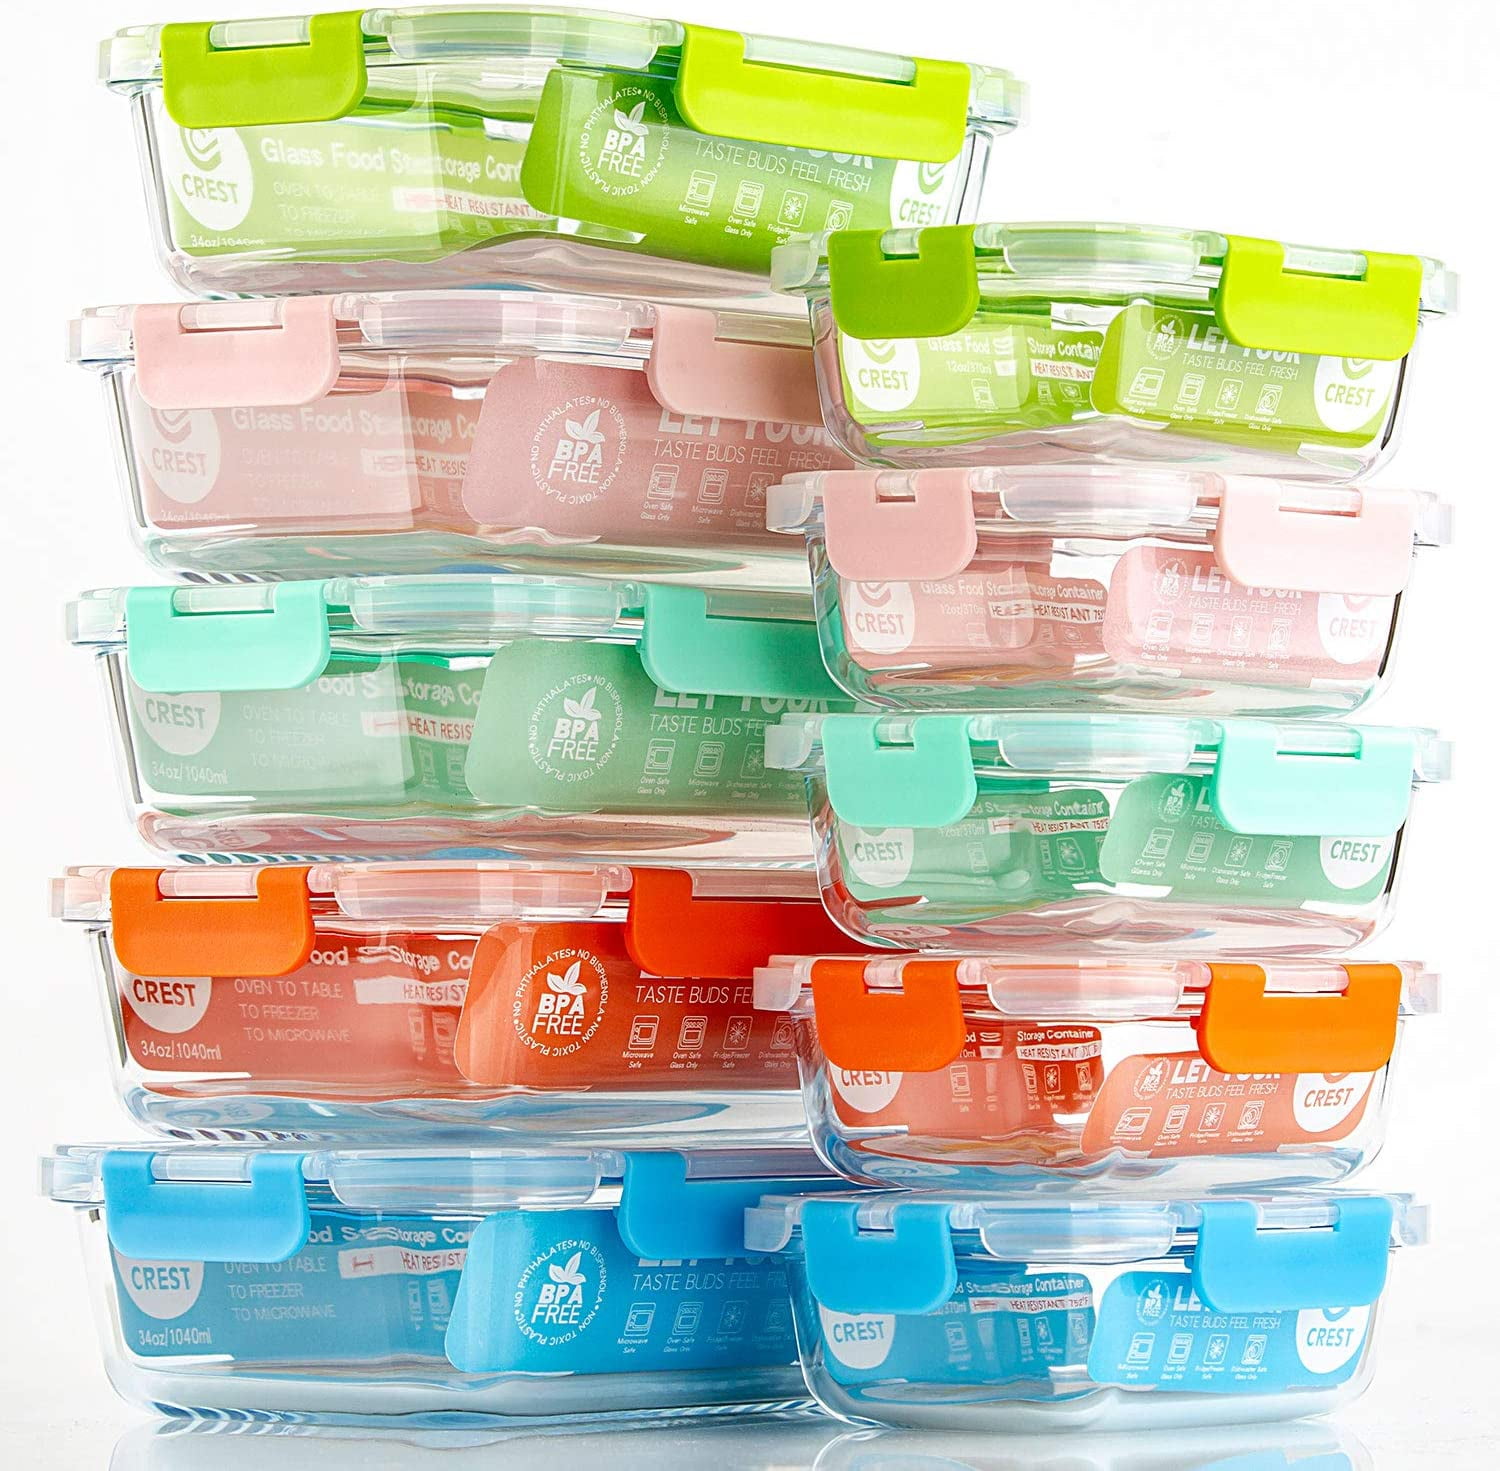 Bene Casa 10-piece glass food storage container set, air tight led